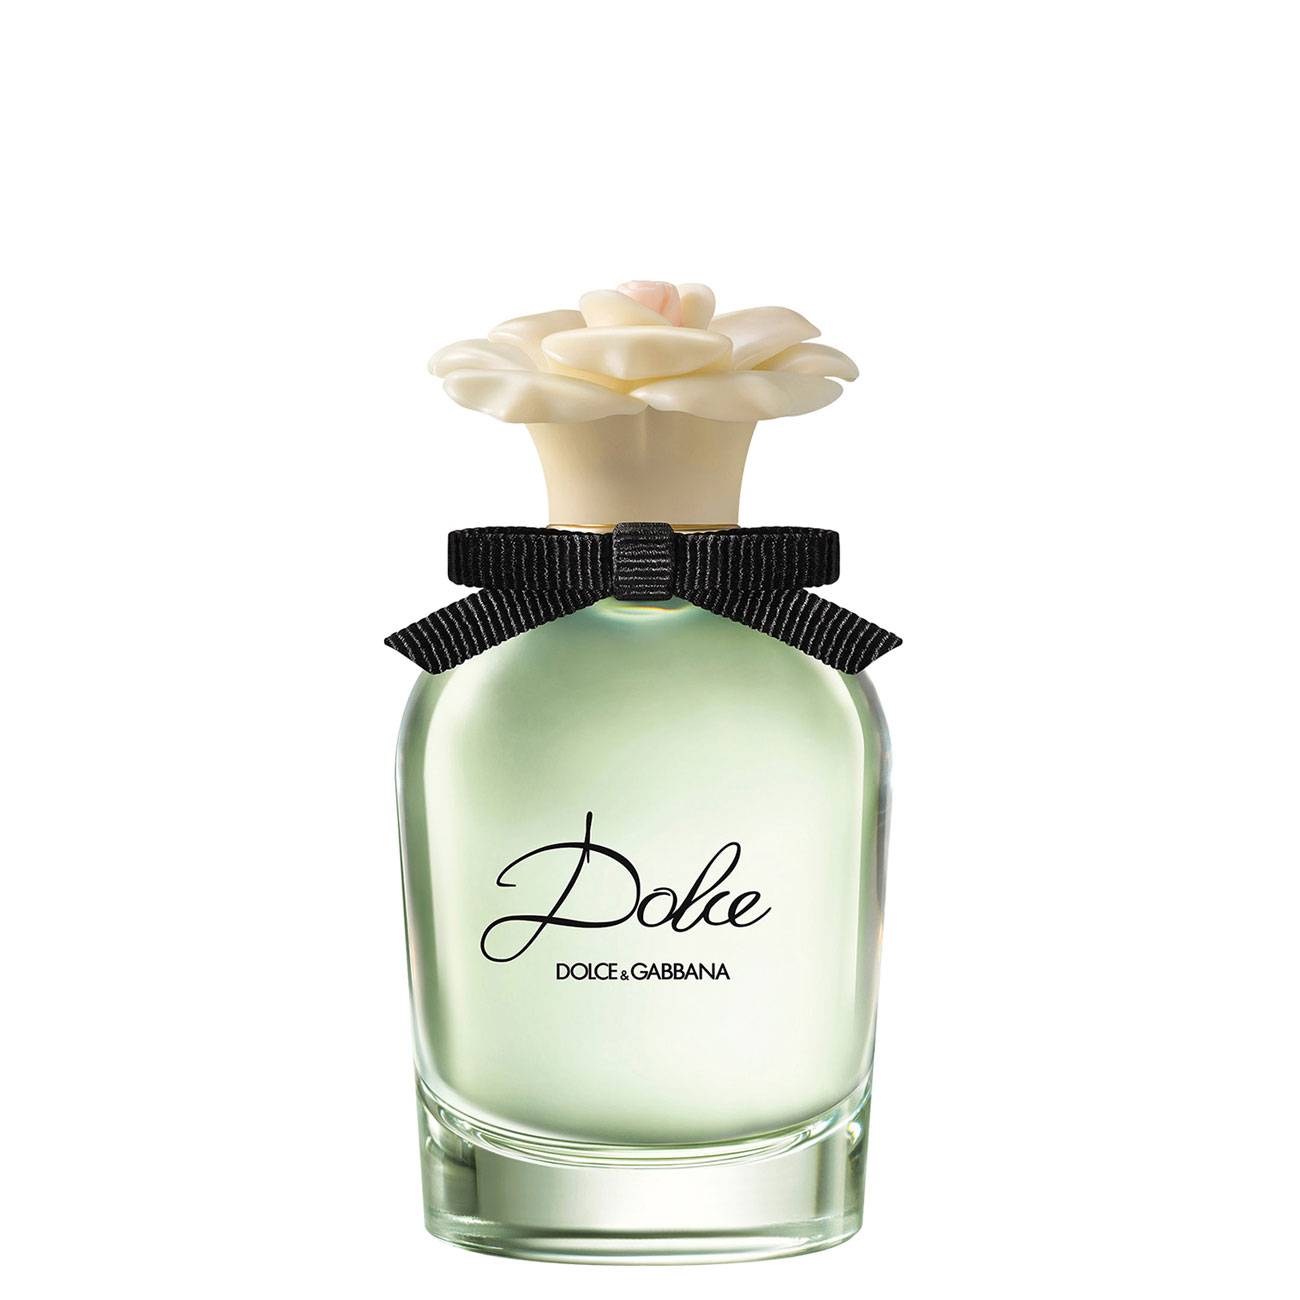 DOLCE 75ml